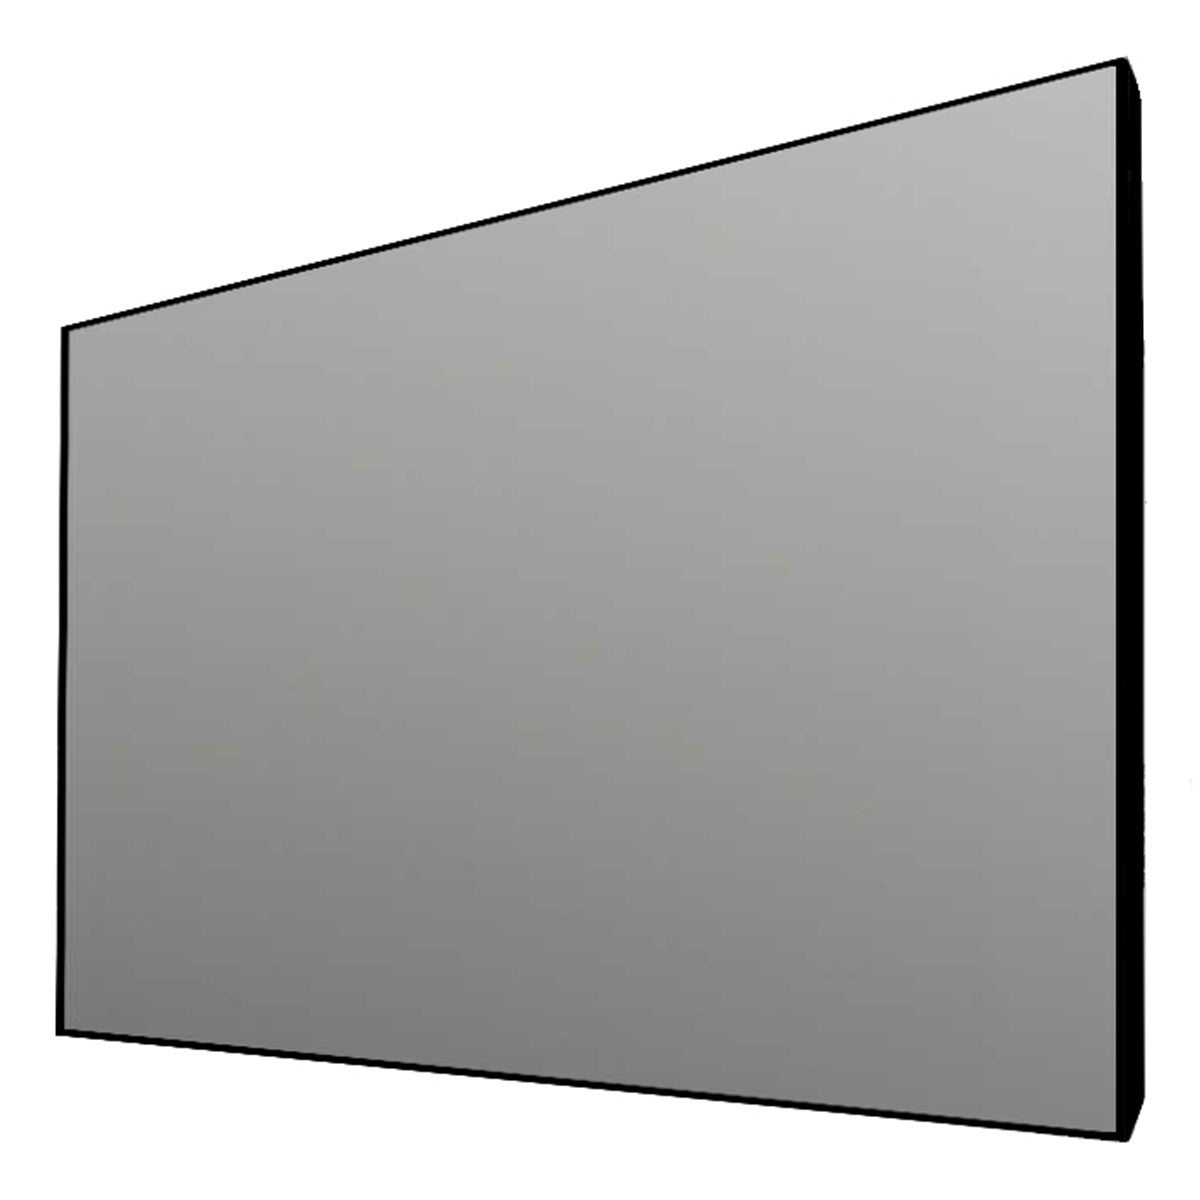 Stewart Balón Edge Fixed Frame 110" HDTV Projector Screen with Ambient Light Rejection (FireHawk G5)